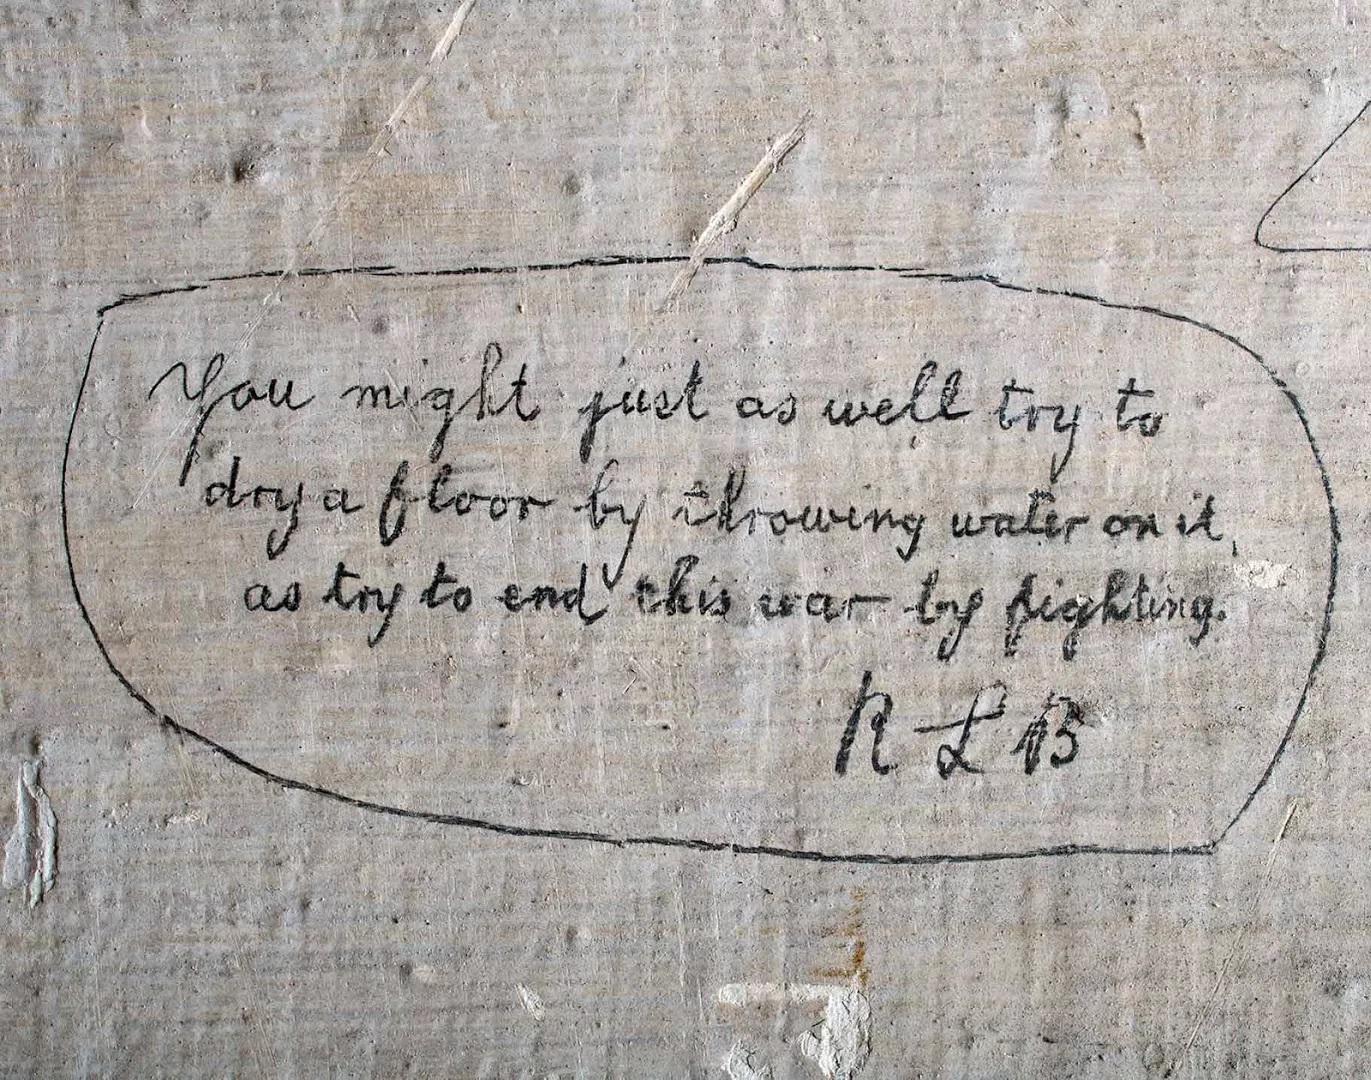 Graffiti on the walls of Richmond Castle in England. This inscription is by a socialist conscientious objector called Richard Lewis Barry. He describes the futility of fighting.